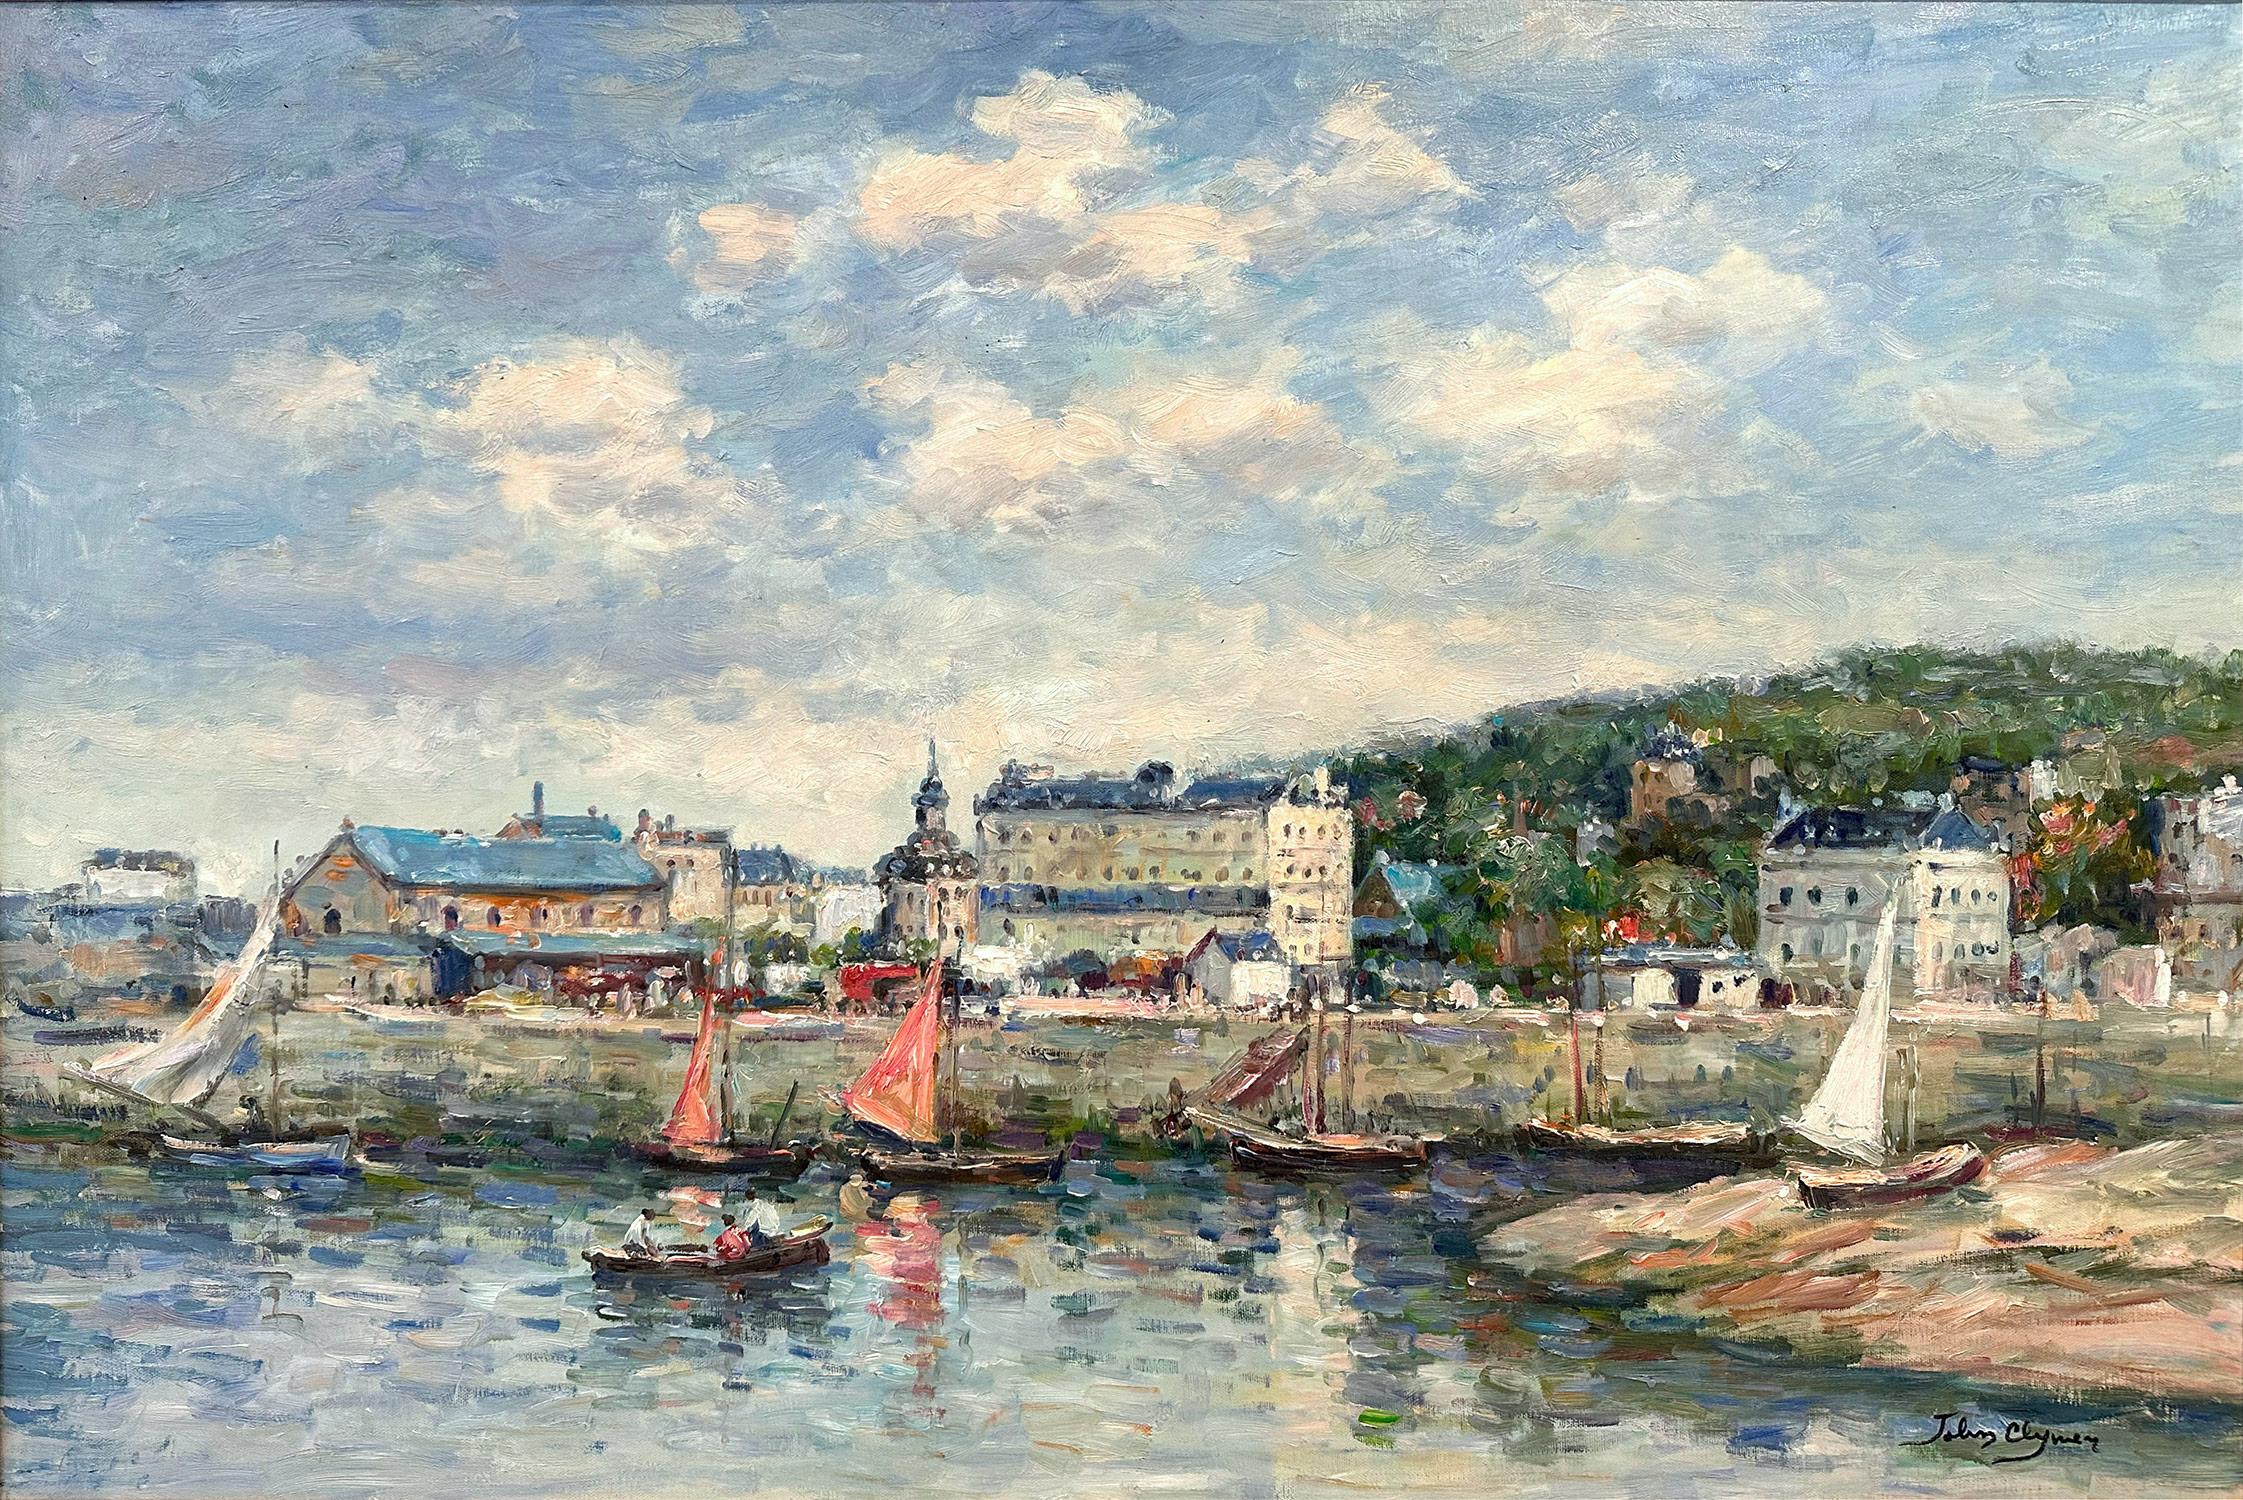 A masterful oil painting depicting a Mediterranean harbor scene of Trouville-sur-Mer, commonly referred to as Trouville with the town buildings in the background and sailboats by British American artist John Clymer. This particular scene is after